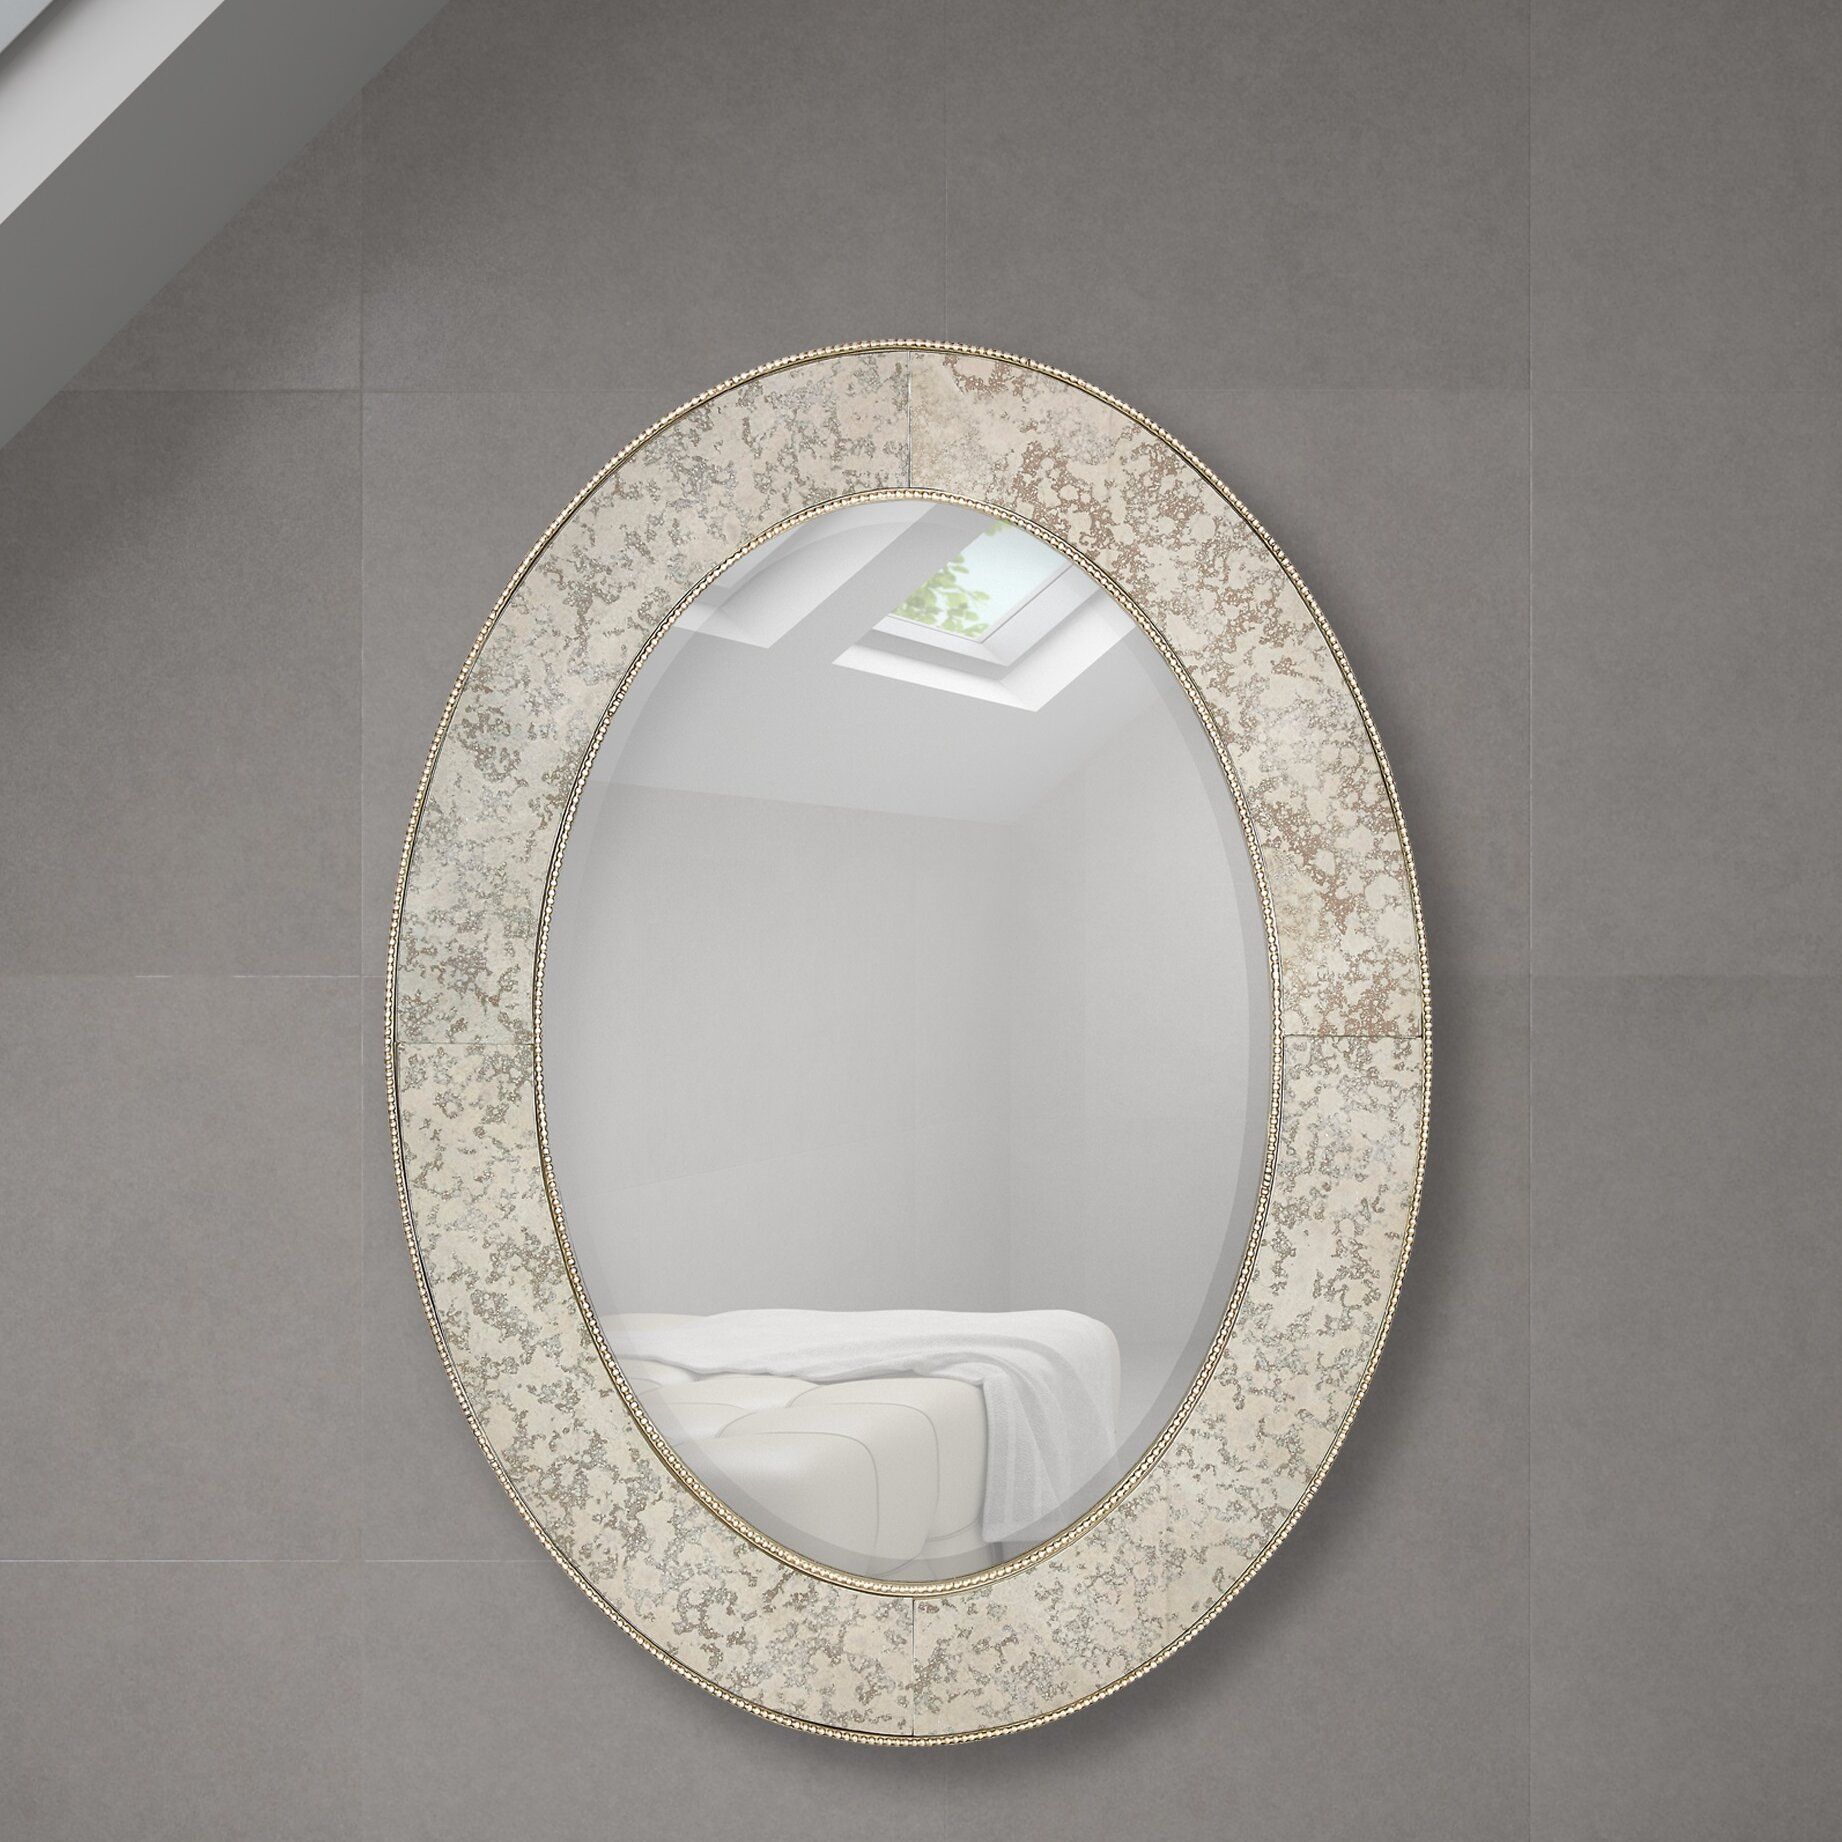 Majestic Mirror Classy Oval Shape Framed Beveled Glass Wall Mirror Throughout Black Oval Cut Wall Mirrors (View 4 of 15)